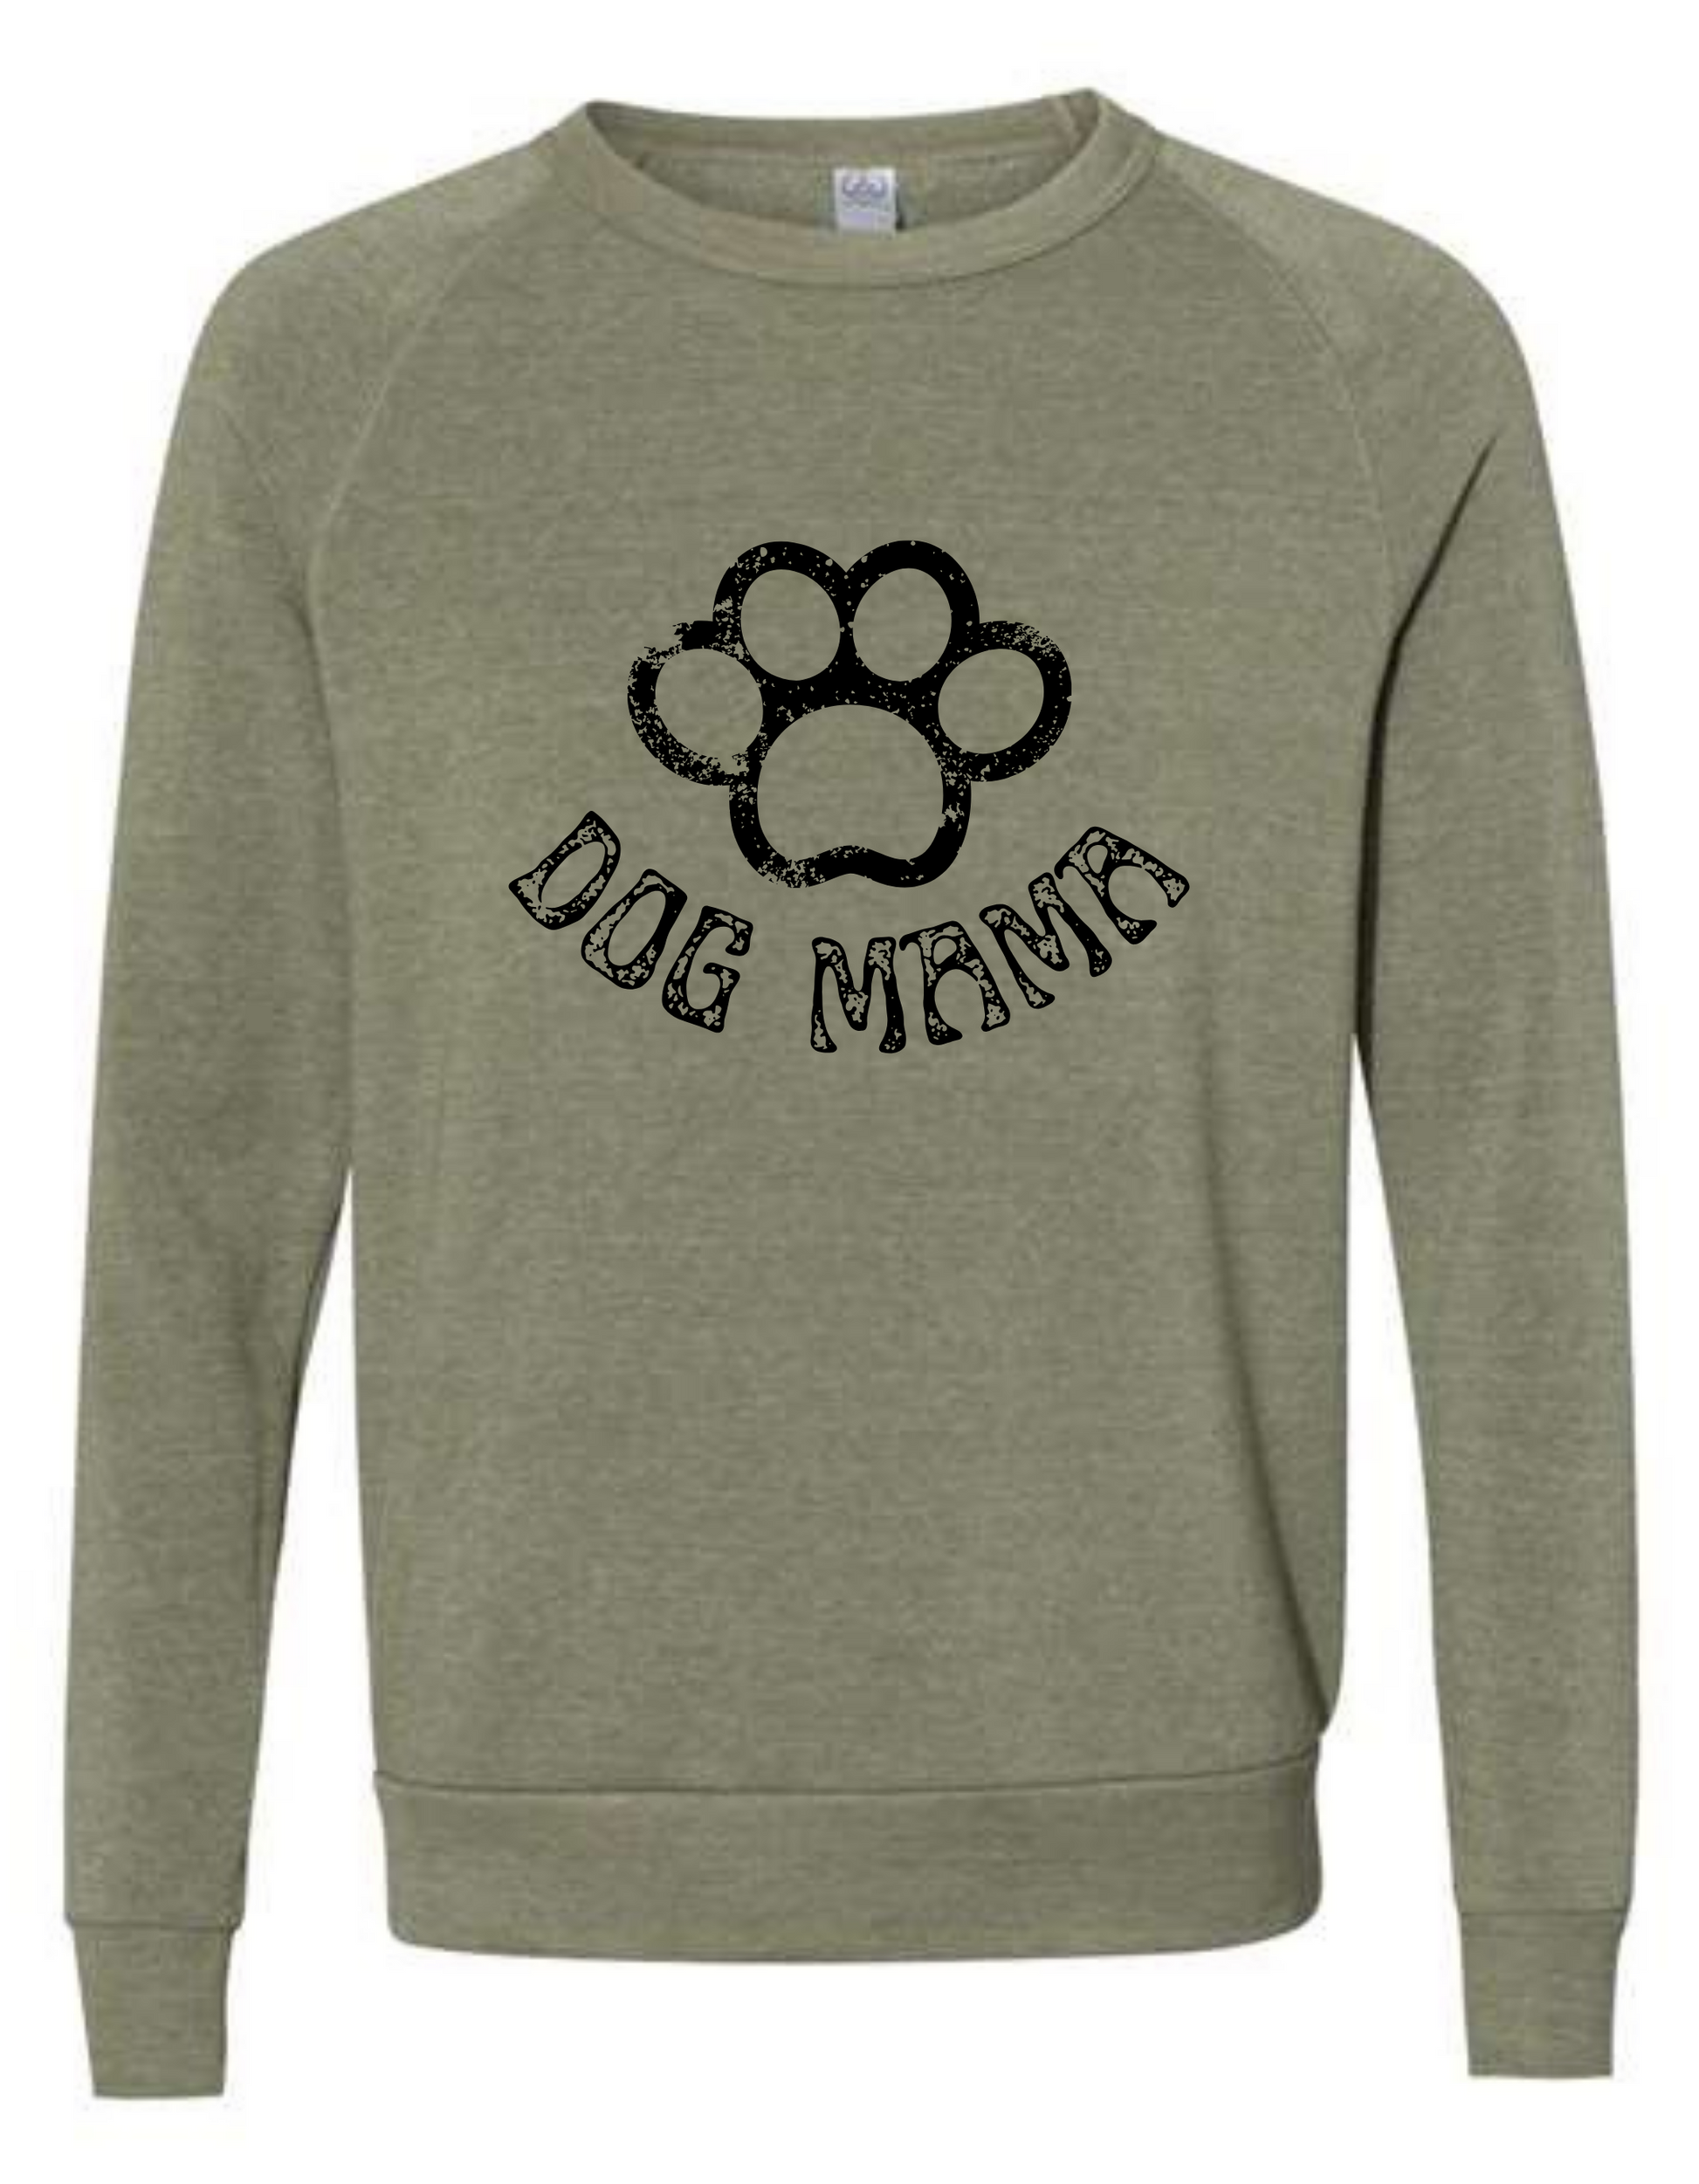 Army green sweatshirt with a black dog paw on the chest and underneath the paw "DOG MAMA"